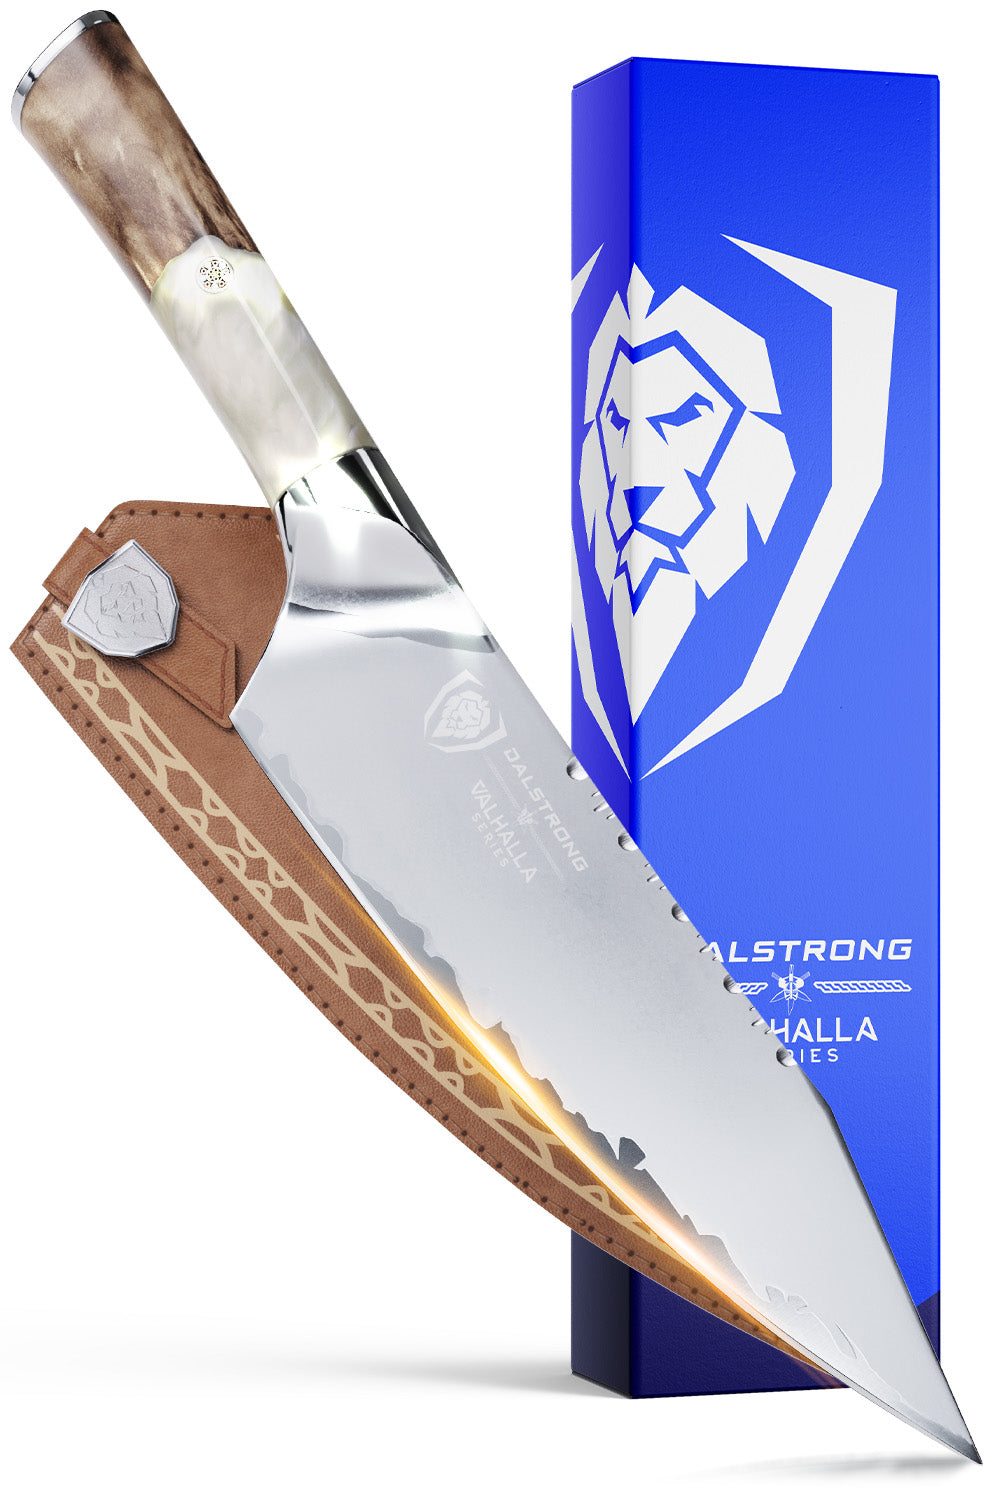 Chef's Knife 8" | Glacial White Resin & Wood Handle | Valhalla Series | Dalstrong ©